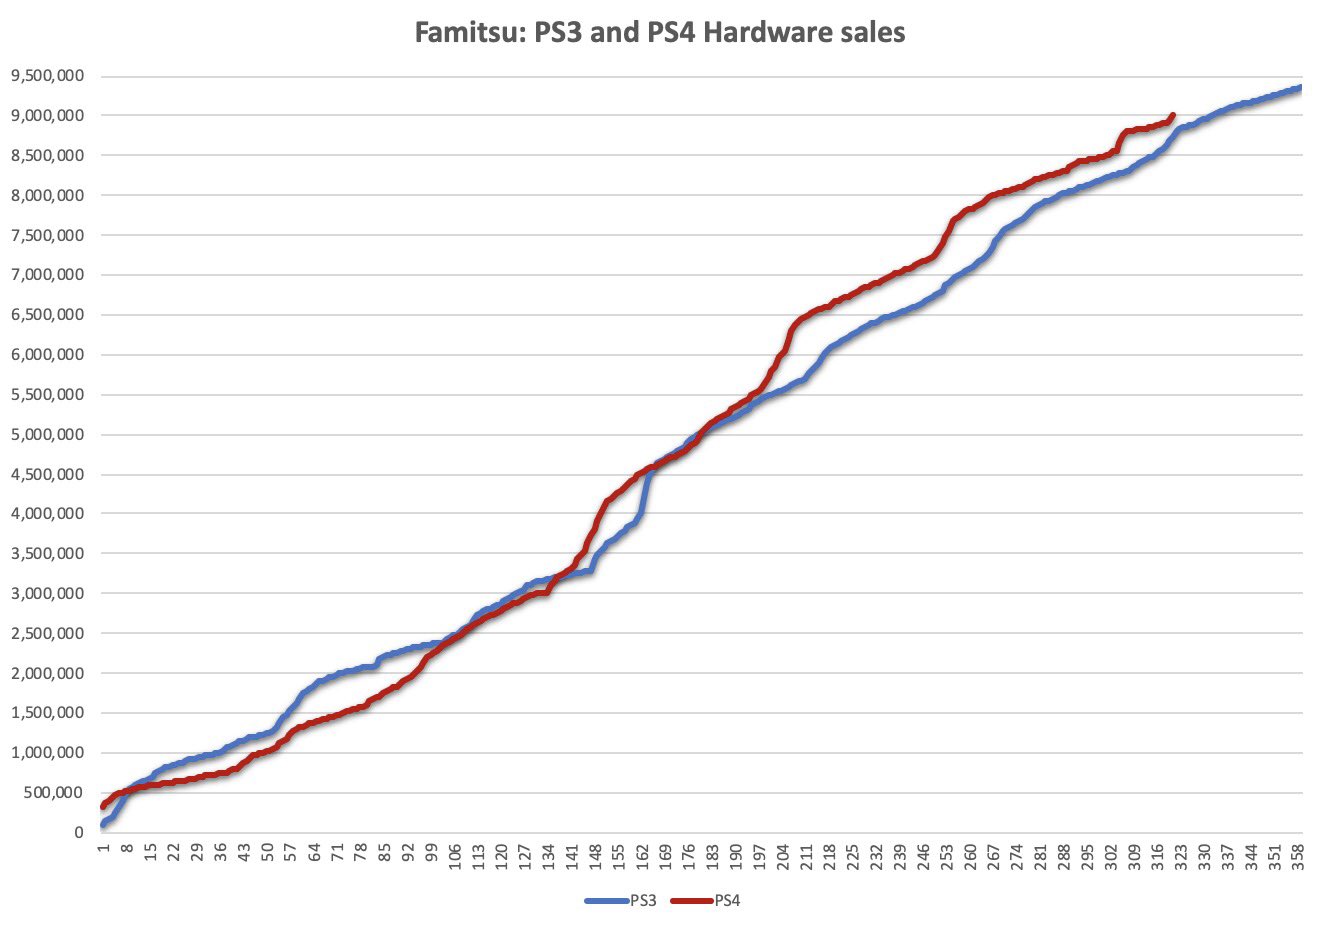 Hunter 🎮 on Twitter: "PS4 vs PS3 sales in Japan. PS4 slightly higher,  looks like PlayStation caps out at 10M, far less than the PS2 era in Japan.  https://t.co/B43EhxhPw3" / Twitter